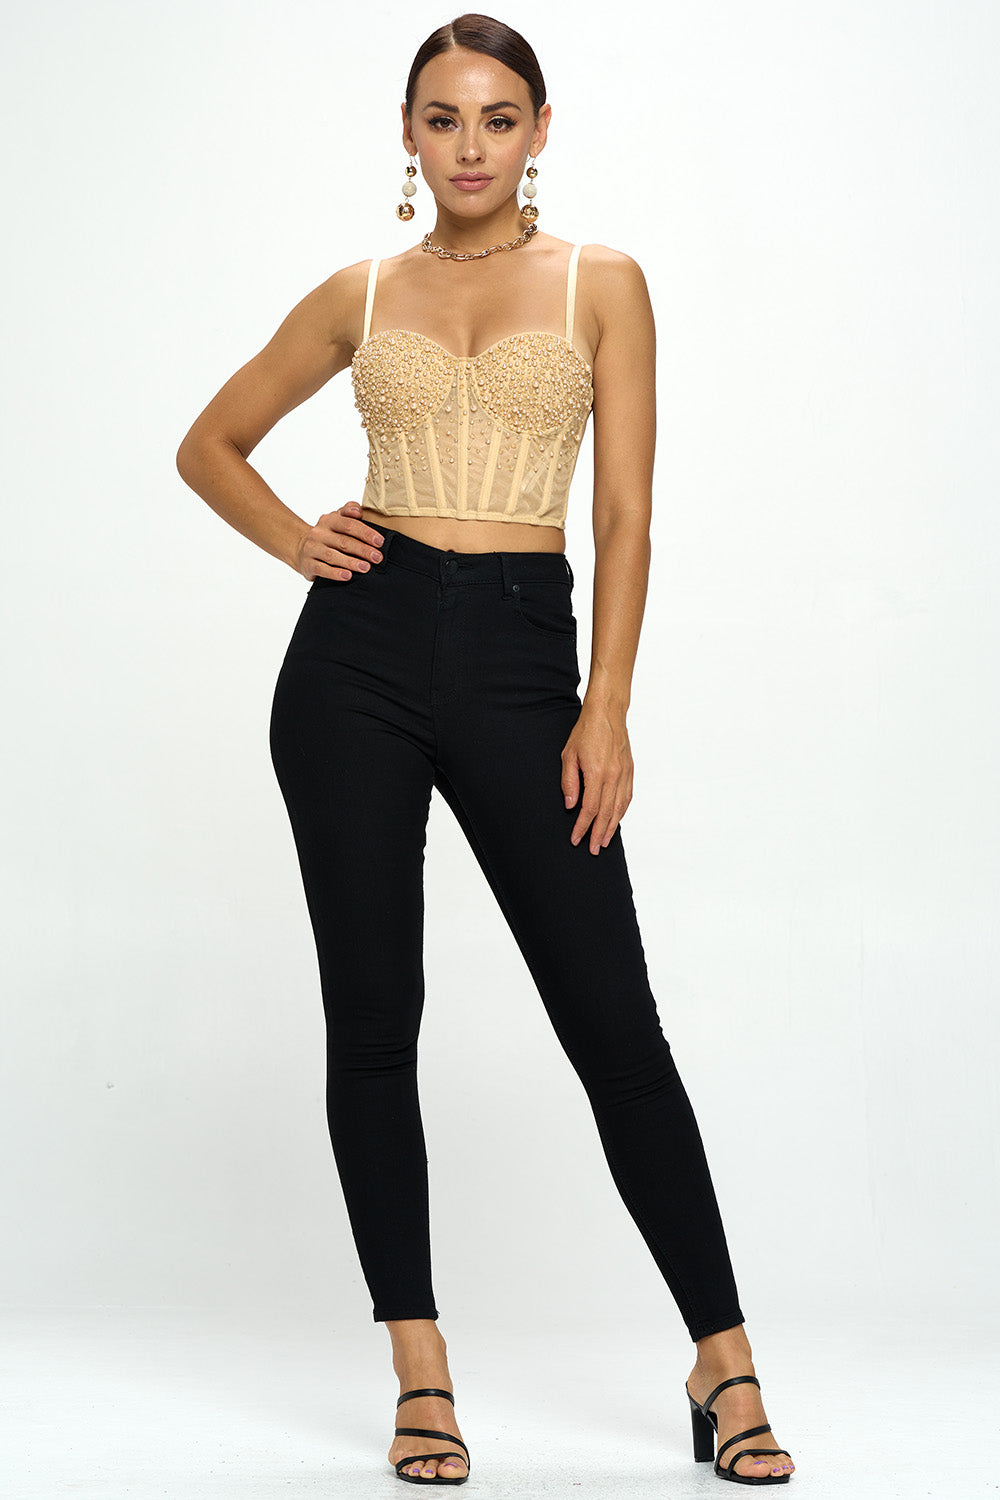 FLORAL EMBROIDERED BUSTIER CROP TOP – OhYes Fashion